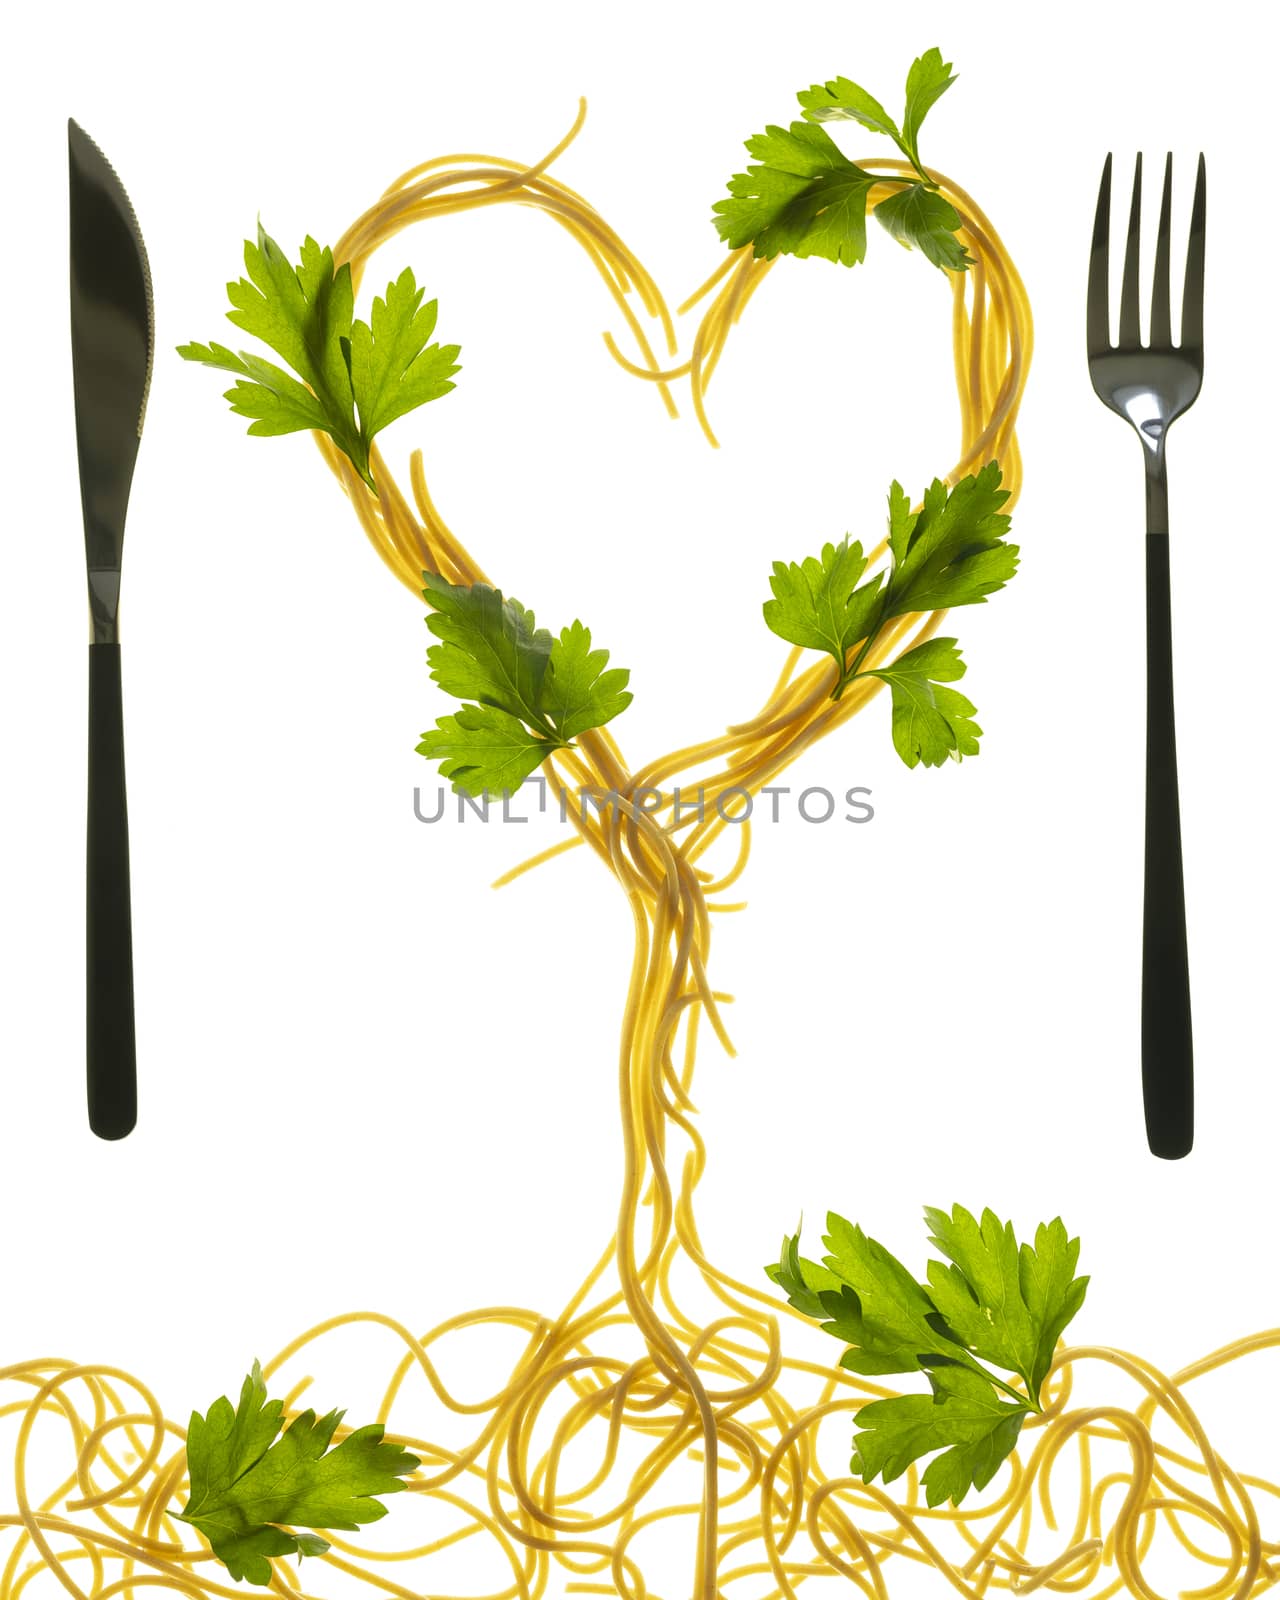 Swirls of cooked spaghetti with fork. Spaghetti heart shape. by sashokddt